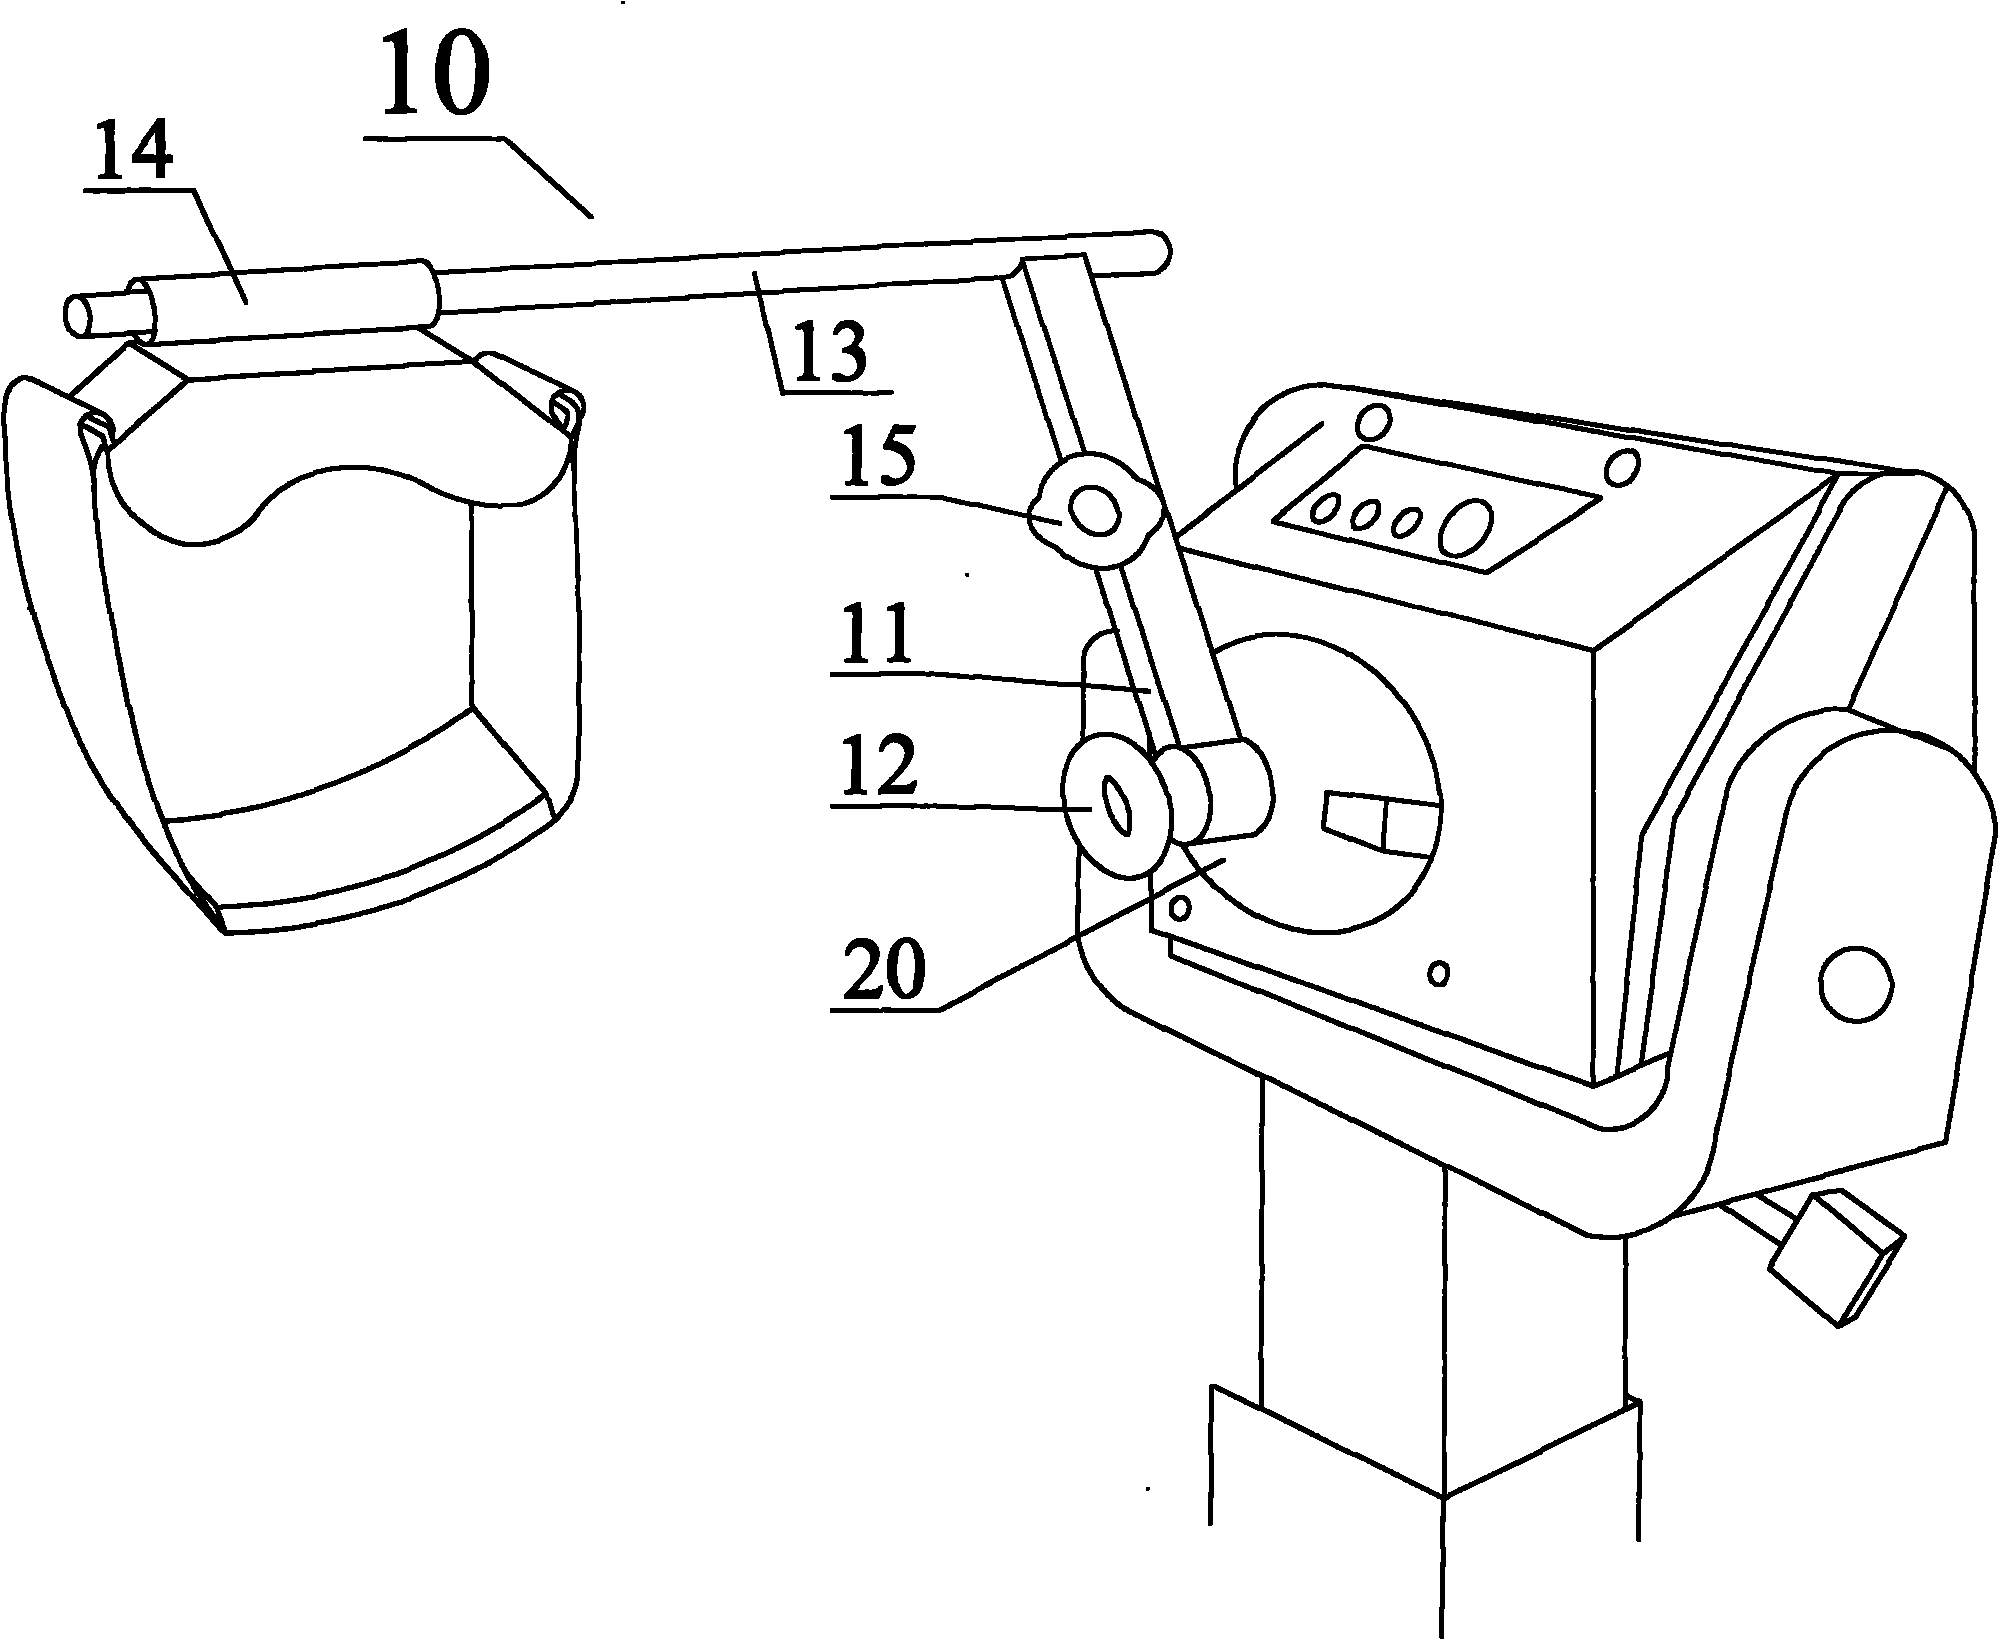 Method for testing mechanical properties of flexion and extension muscles of cervical vertebrae